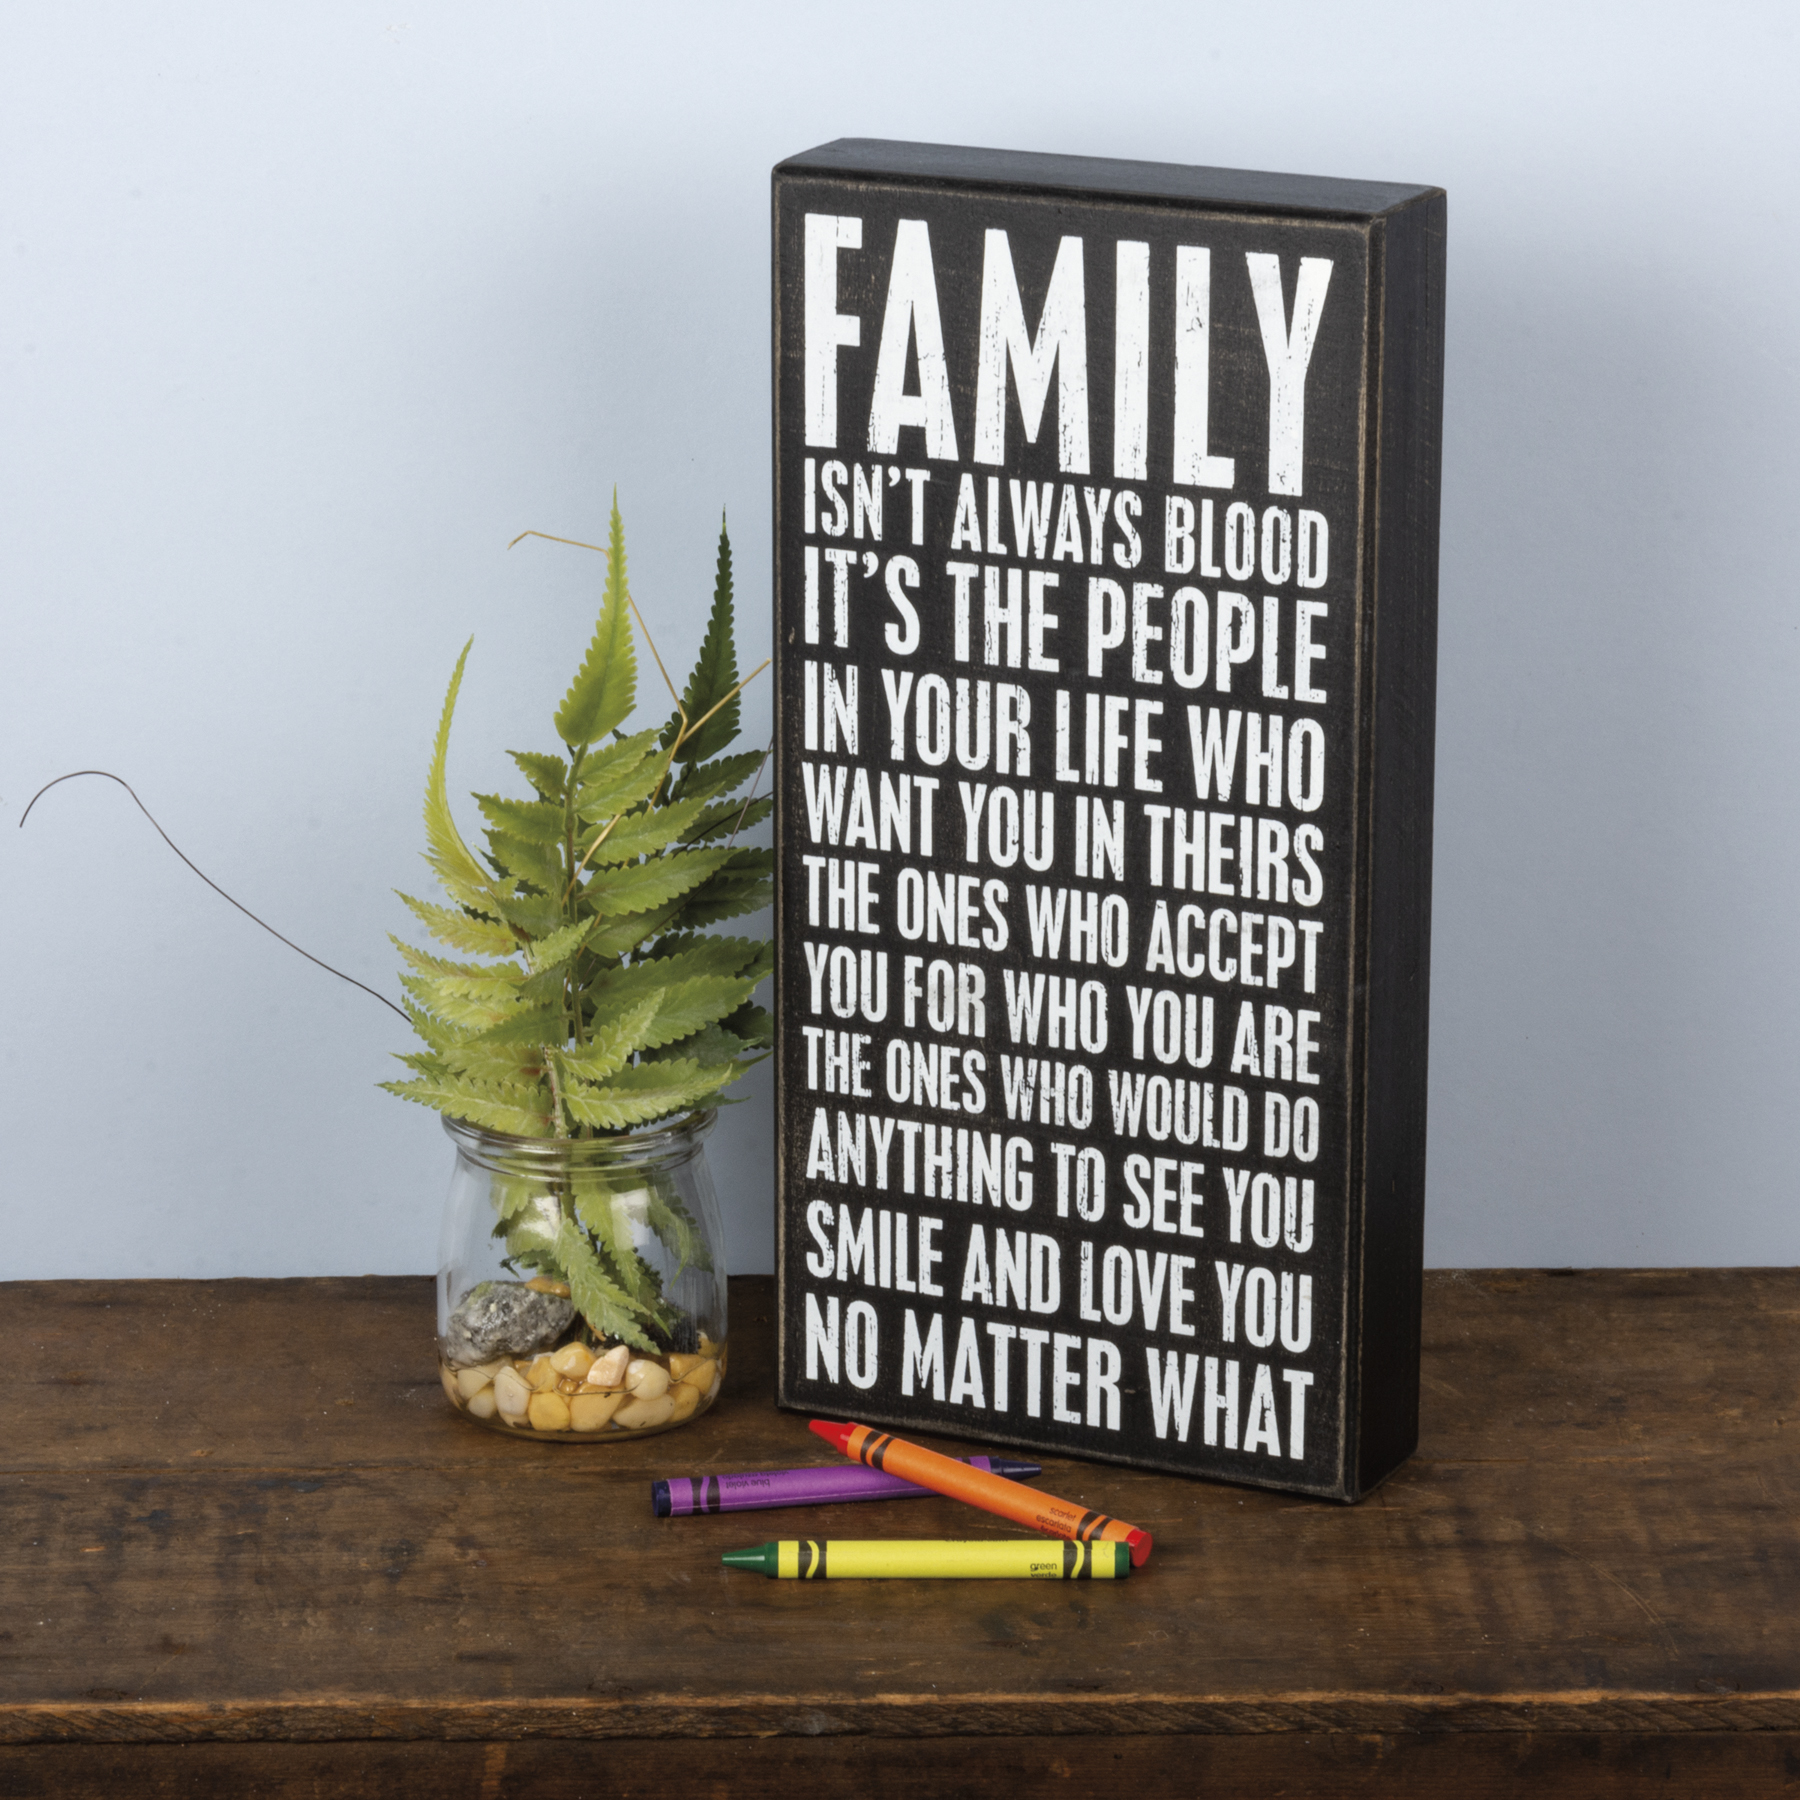 Family is Defined by LOVE Not Blood Vinyl Sticker Great Gift 